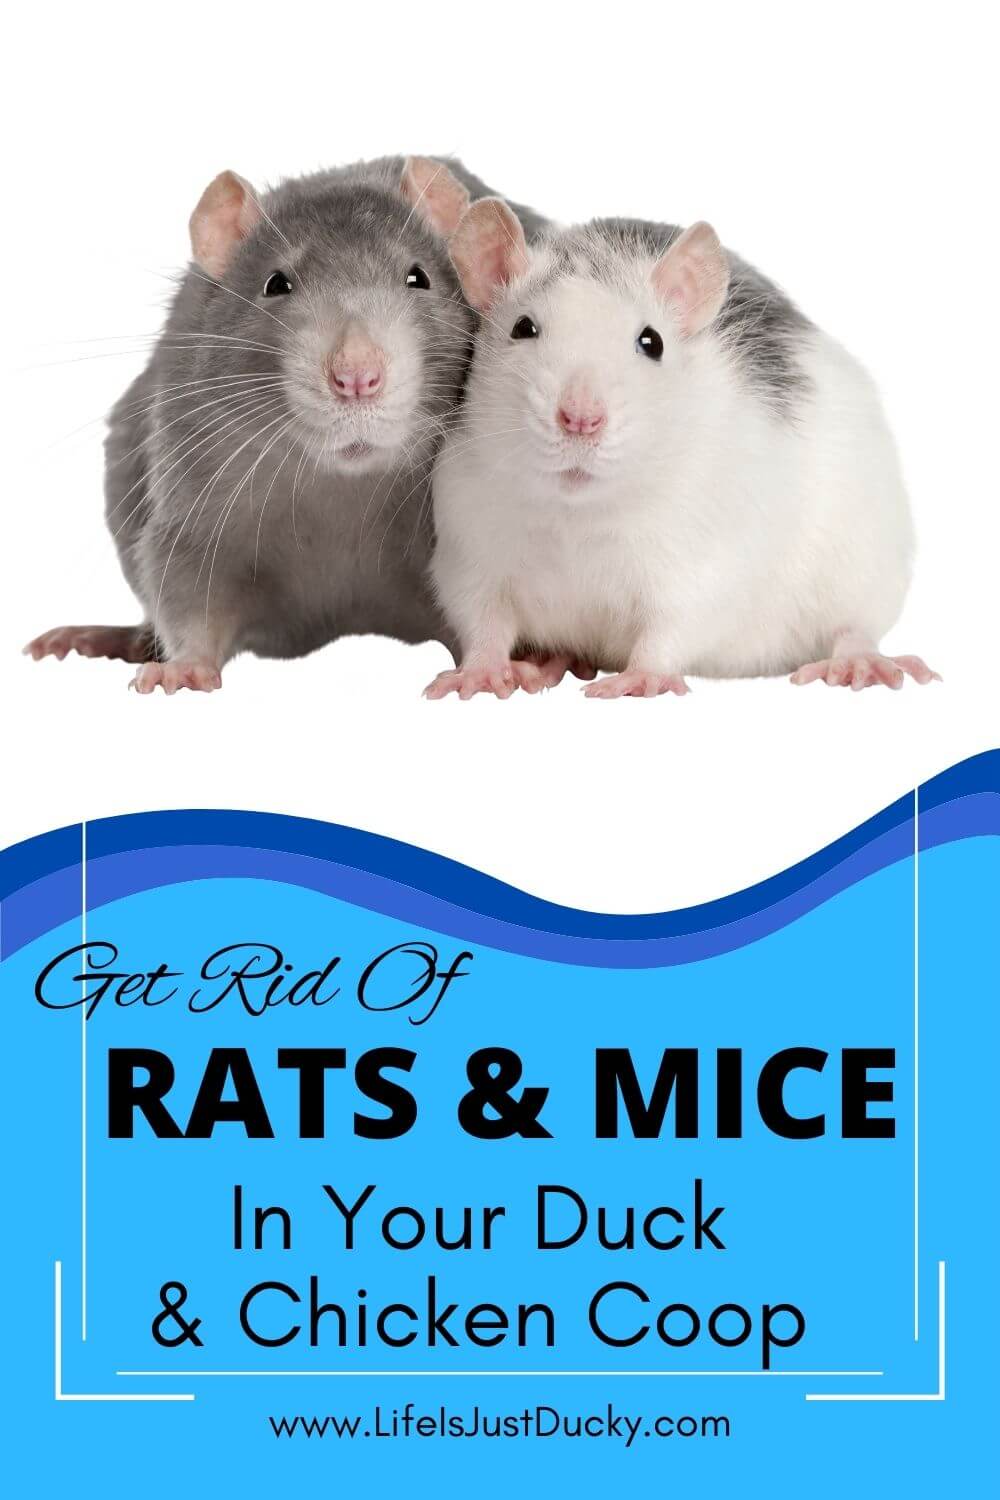 https://www.lifeisjustducky.com/wp-content/uploads/2022/04/rats-and-mice5.jpg